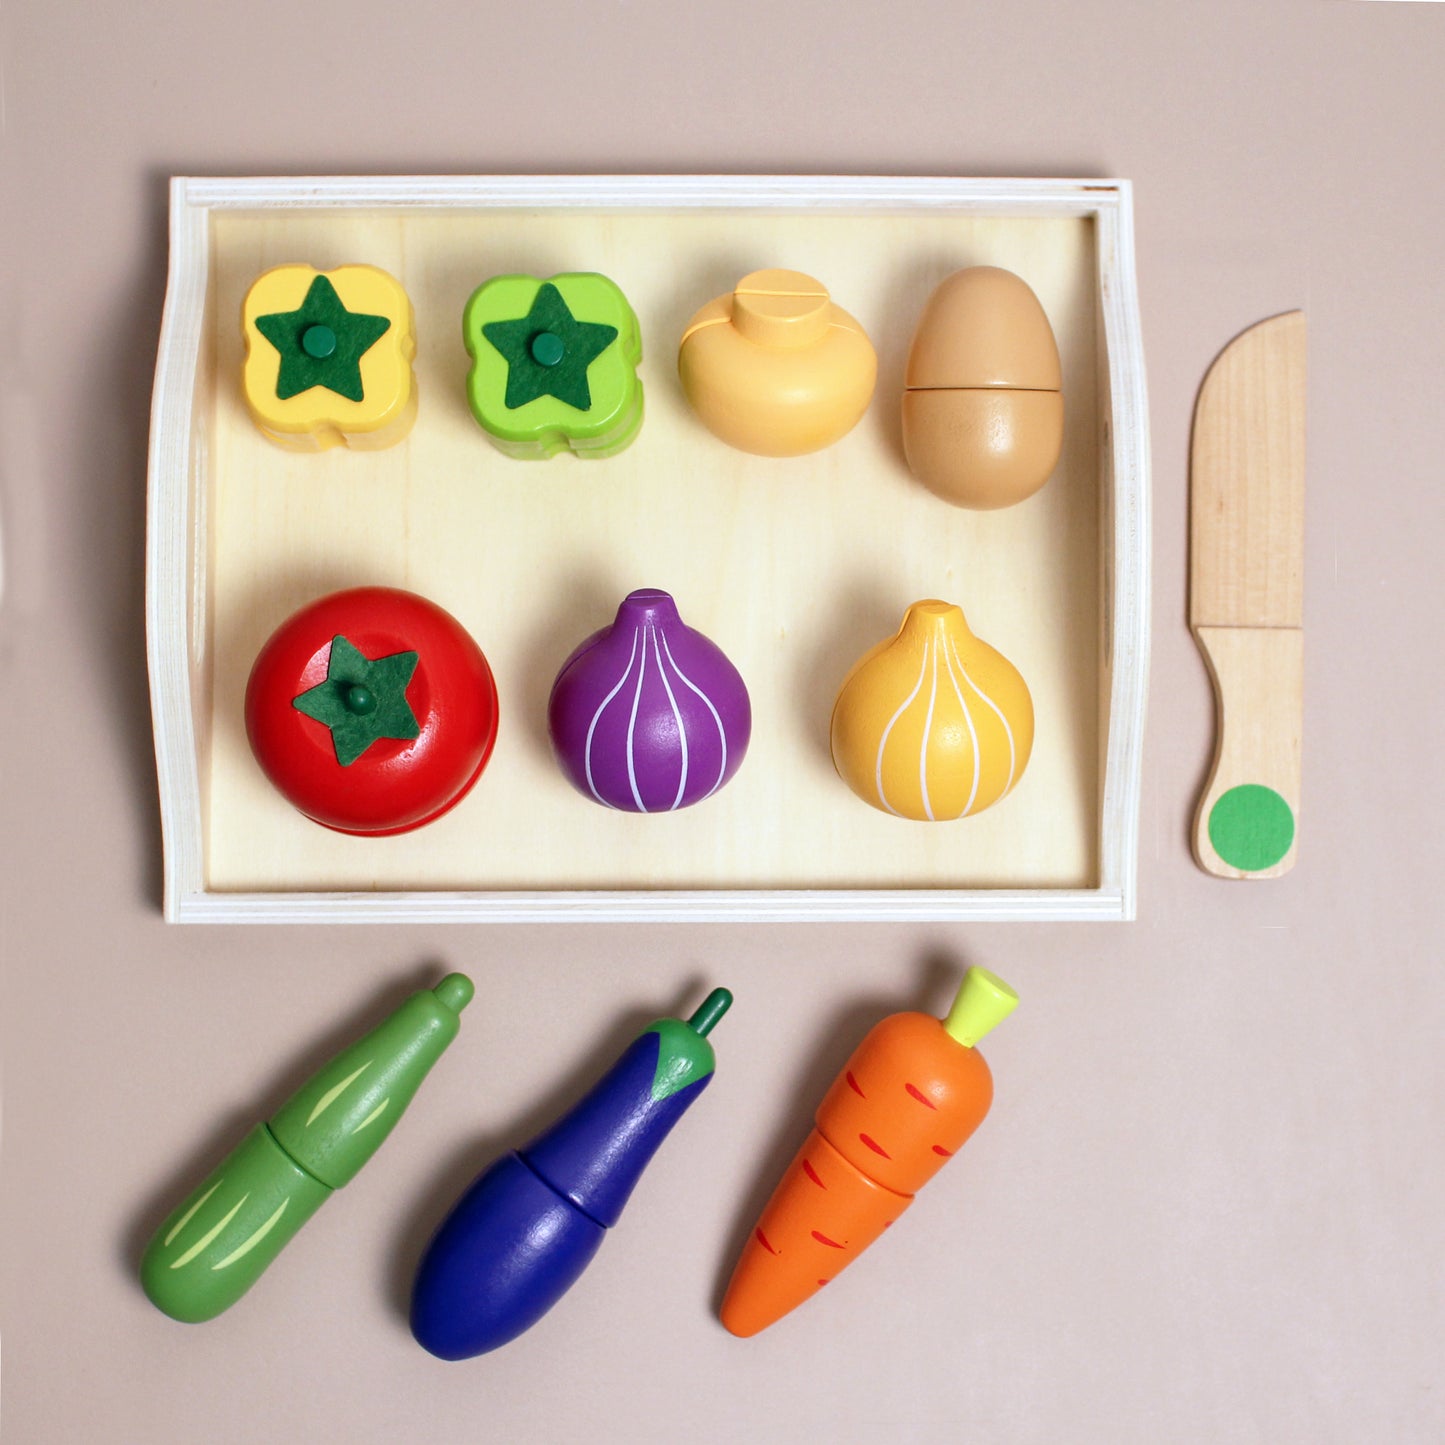 eco friendly colourful wooden vegetables - potato, mushroom, carrot, tomato, onion, eggplant, peppers, cucumber - wooden knife included with tray 